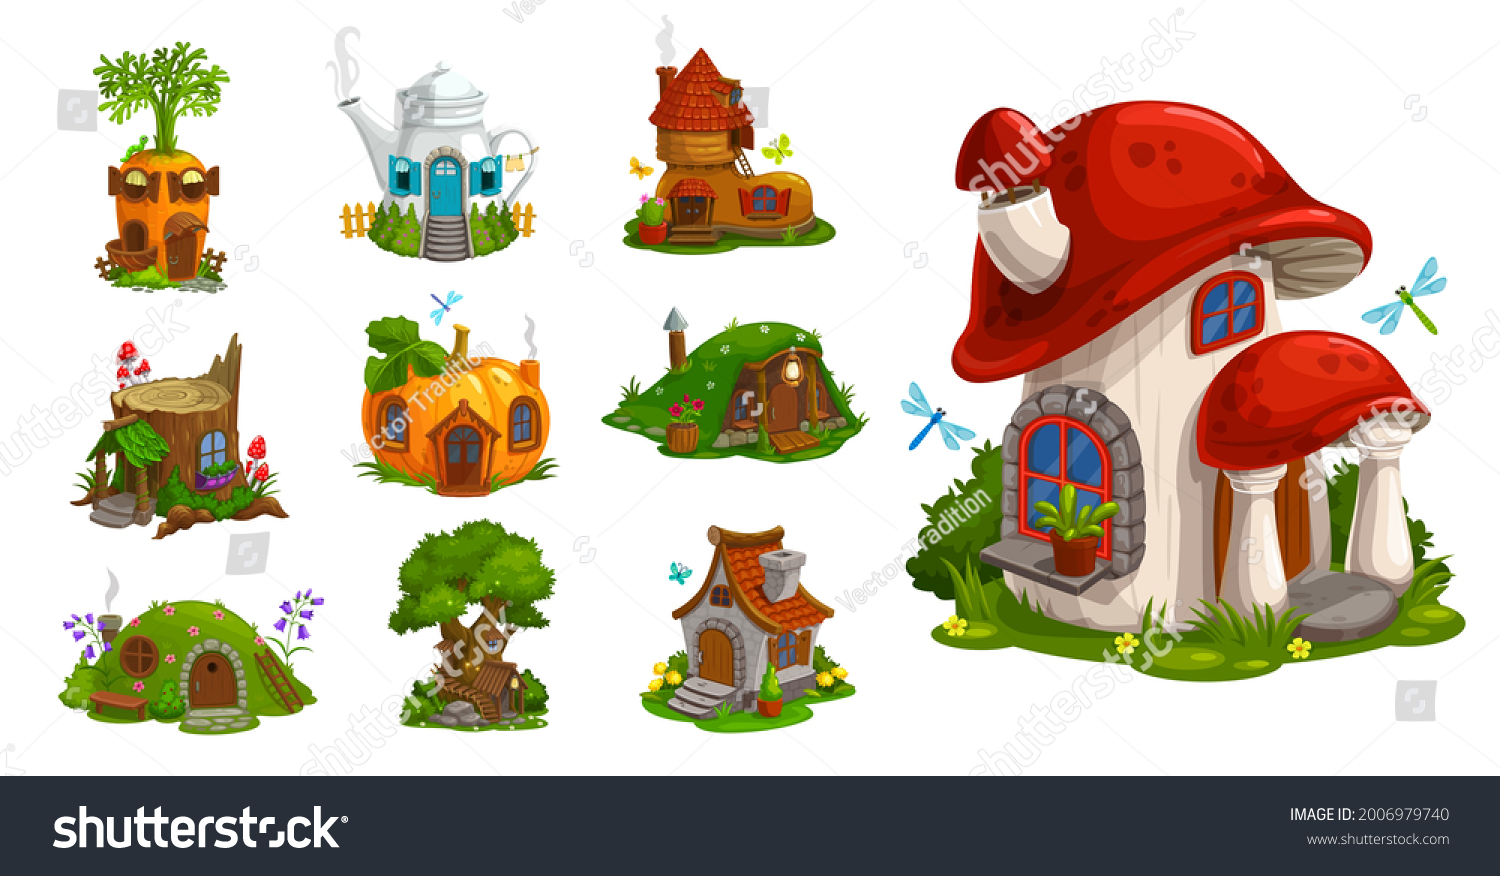 SVG of Gnome houses vector icons, cartoon fantasy building made of plants, vegetables and trees with green leaves. Fairy, gnome or elf cute homes in pumpkin, mushroom, carrot, stump and pot isolated set svg